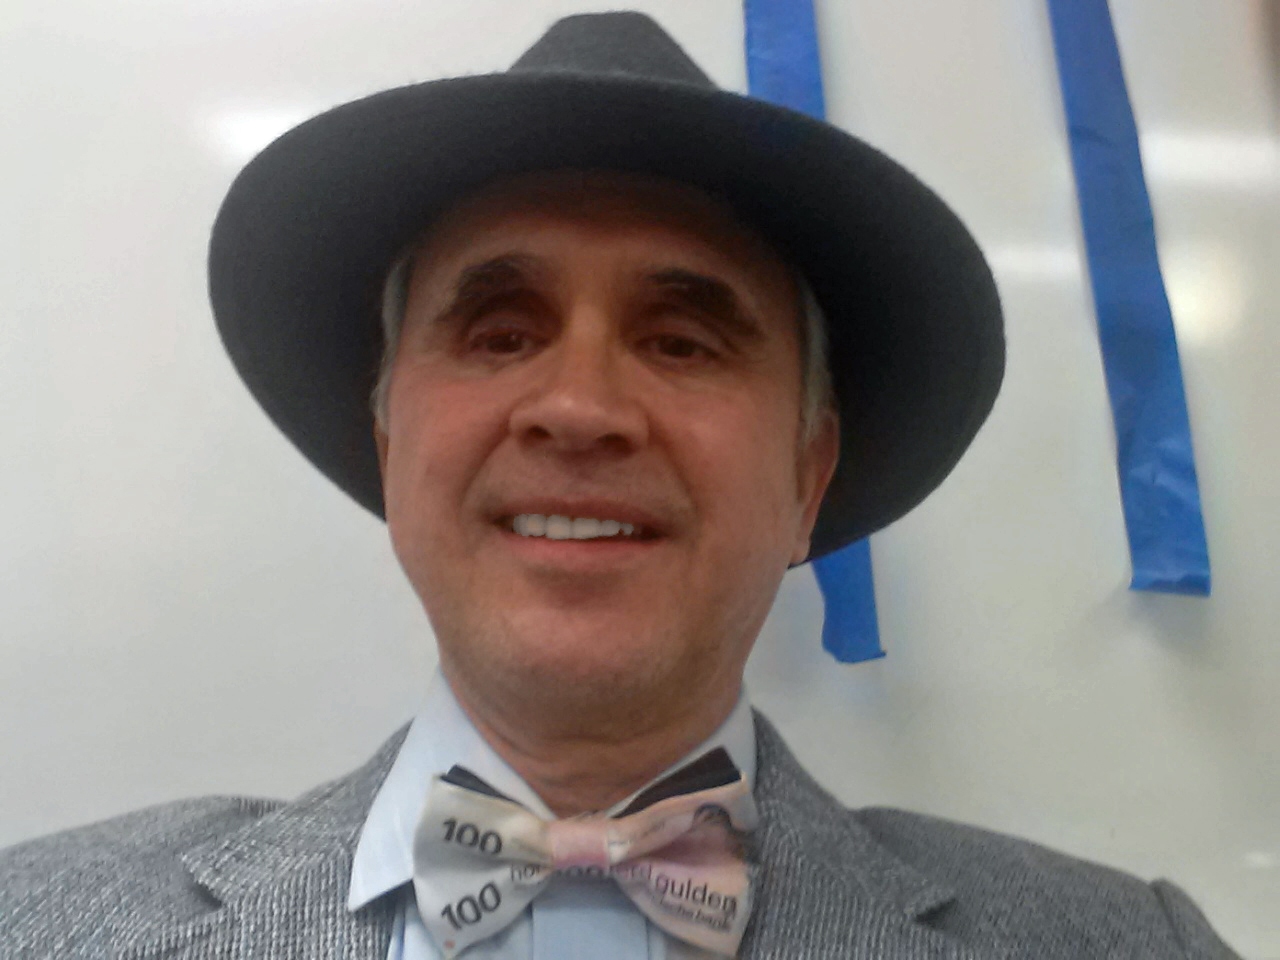 Selfie of Detective Leonard in costume waiting on set of Rigged movie.